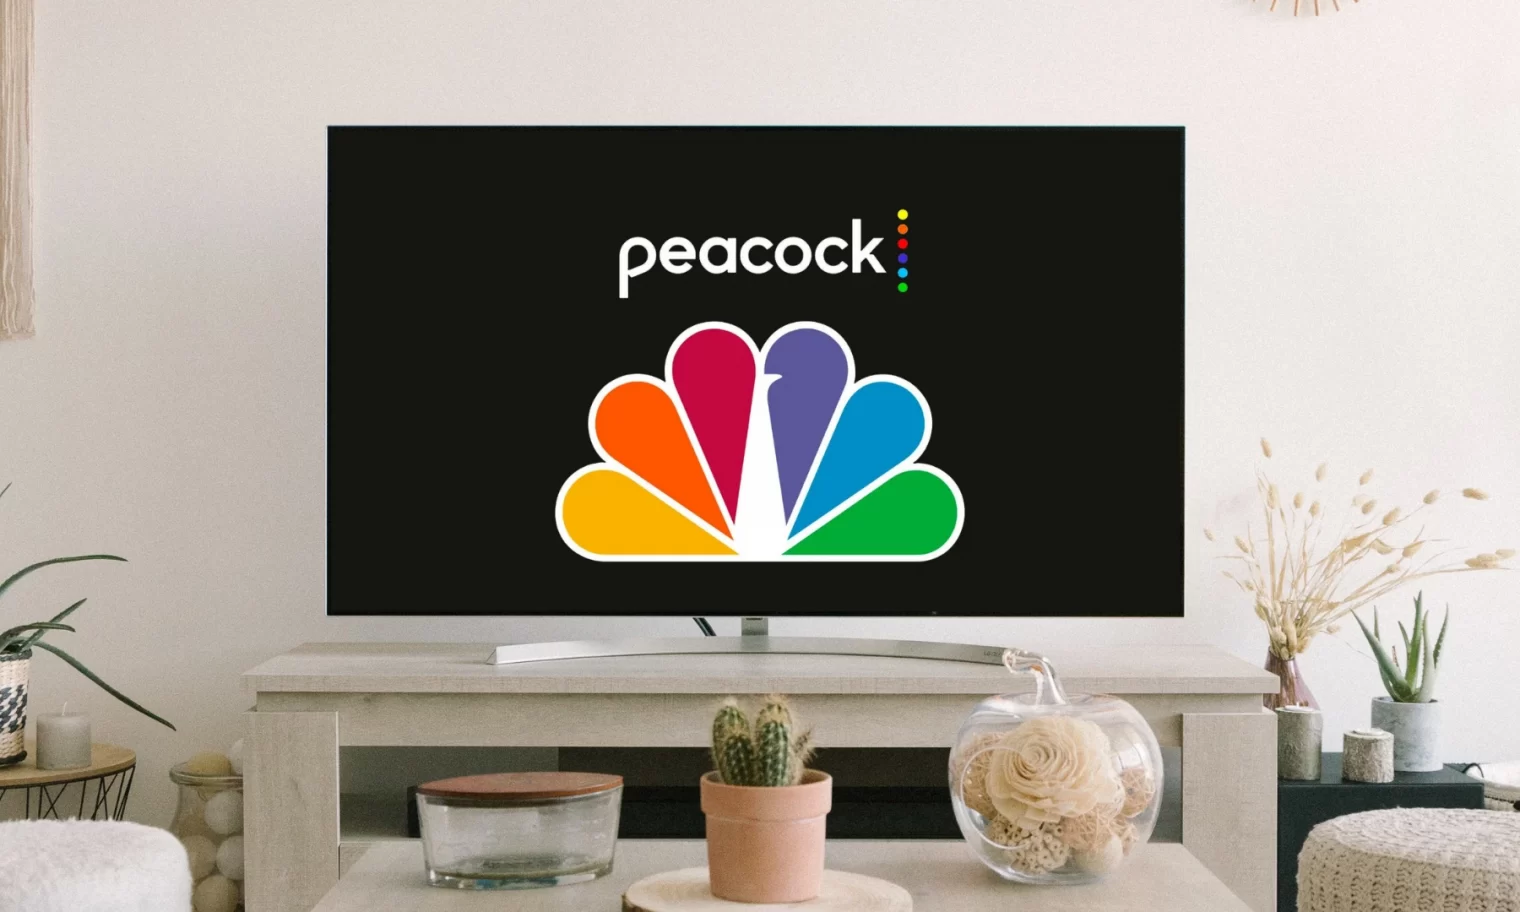 Peacock TV Free Trial How To Get In 2023